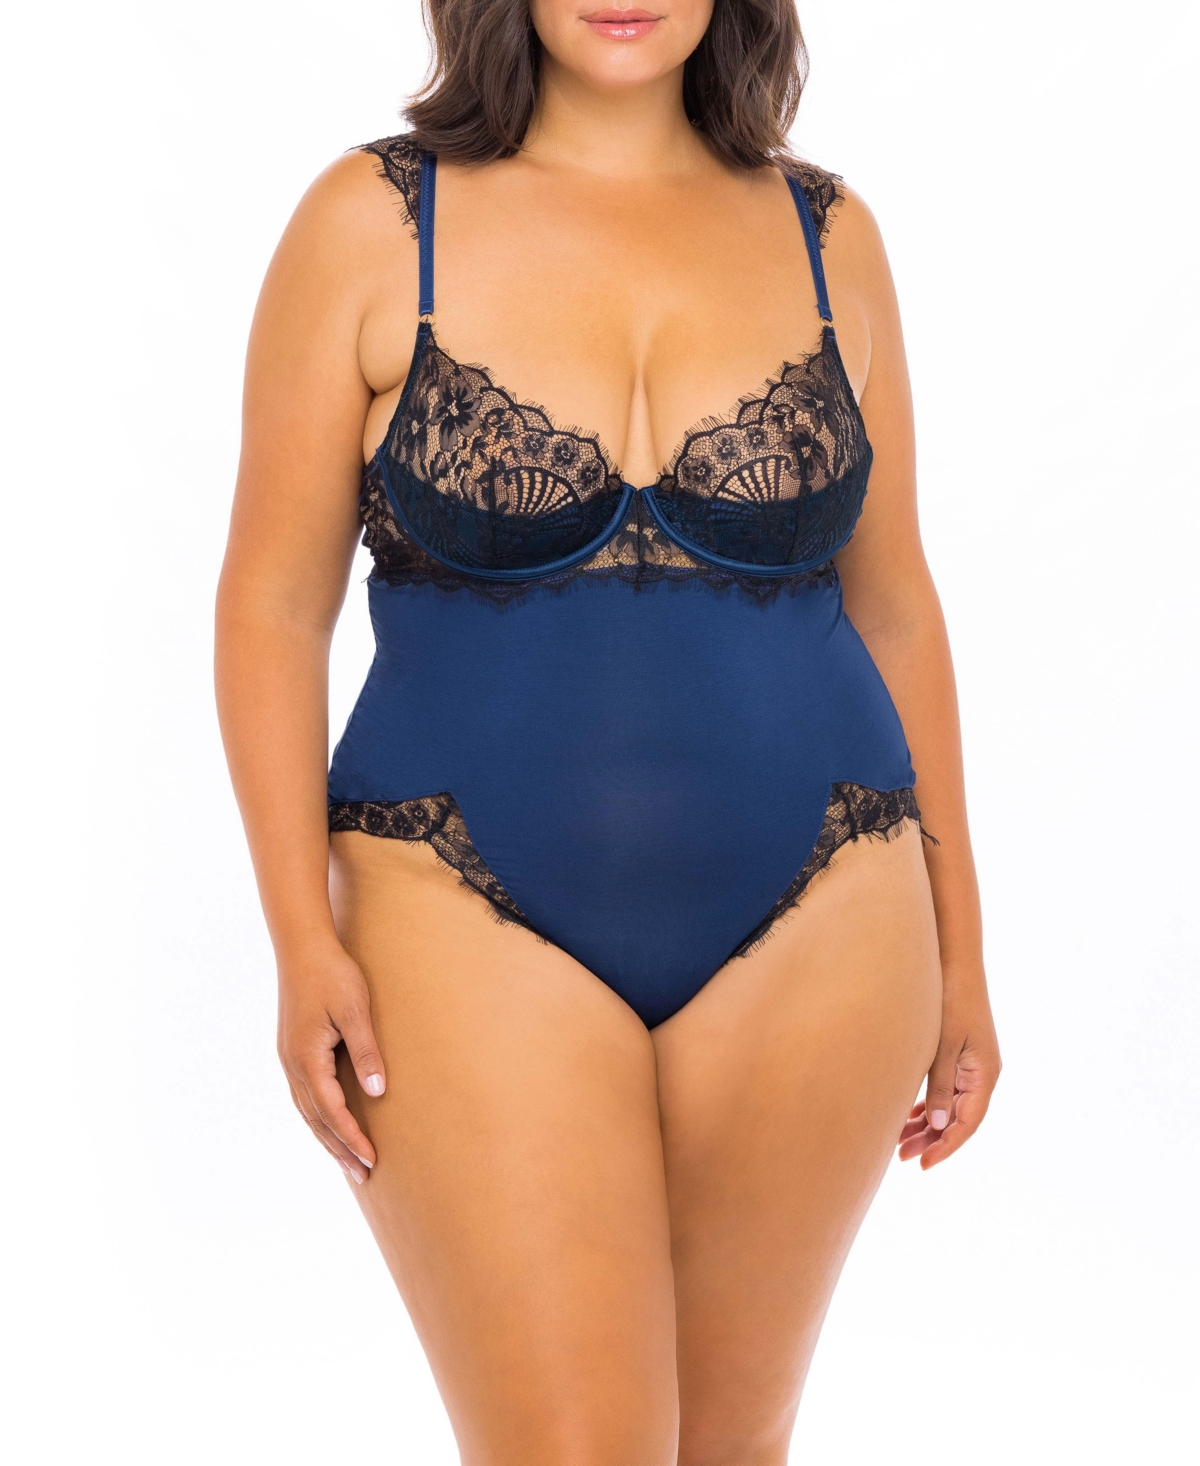 Plus Size Viscose Jersey and Eyelash Lace Molded Shelf Cup Lingerie Teddy with Front and Back High Leg Slits and Eyelash Lace Trimming - Estate Blue,